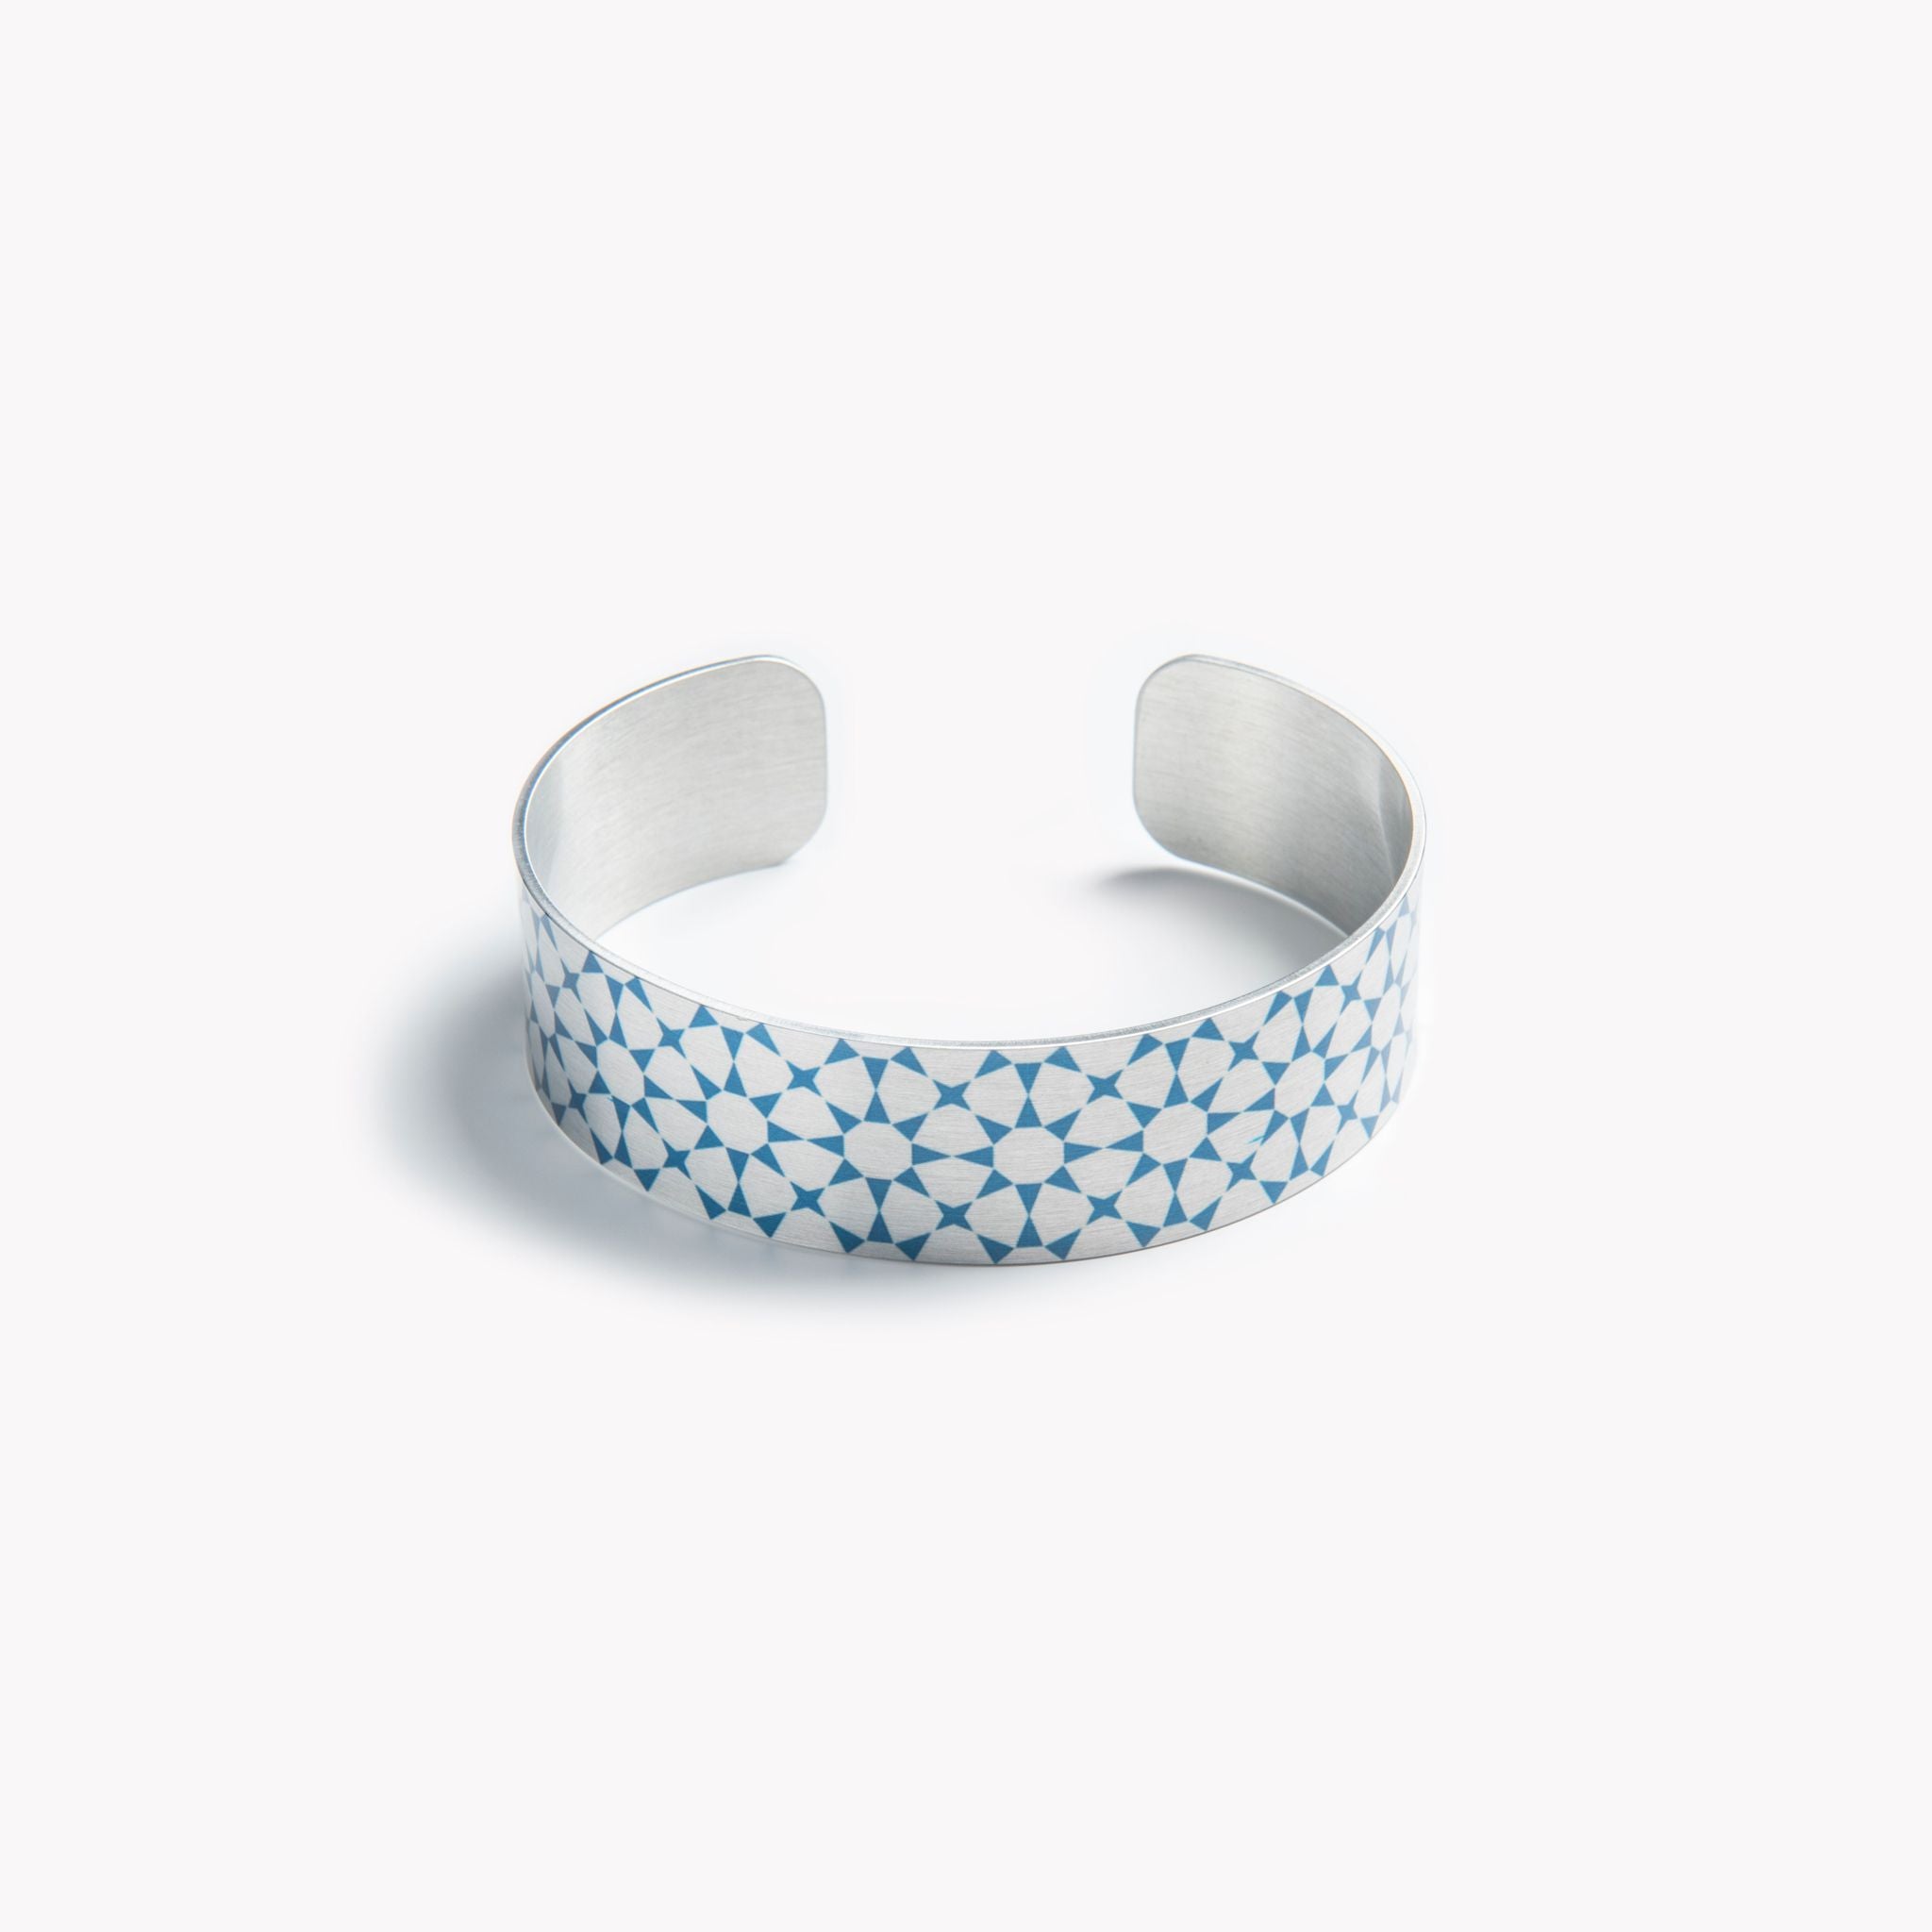 An intricately detailed aluminium cuff bracelet with a teal star pattern.